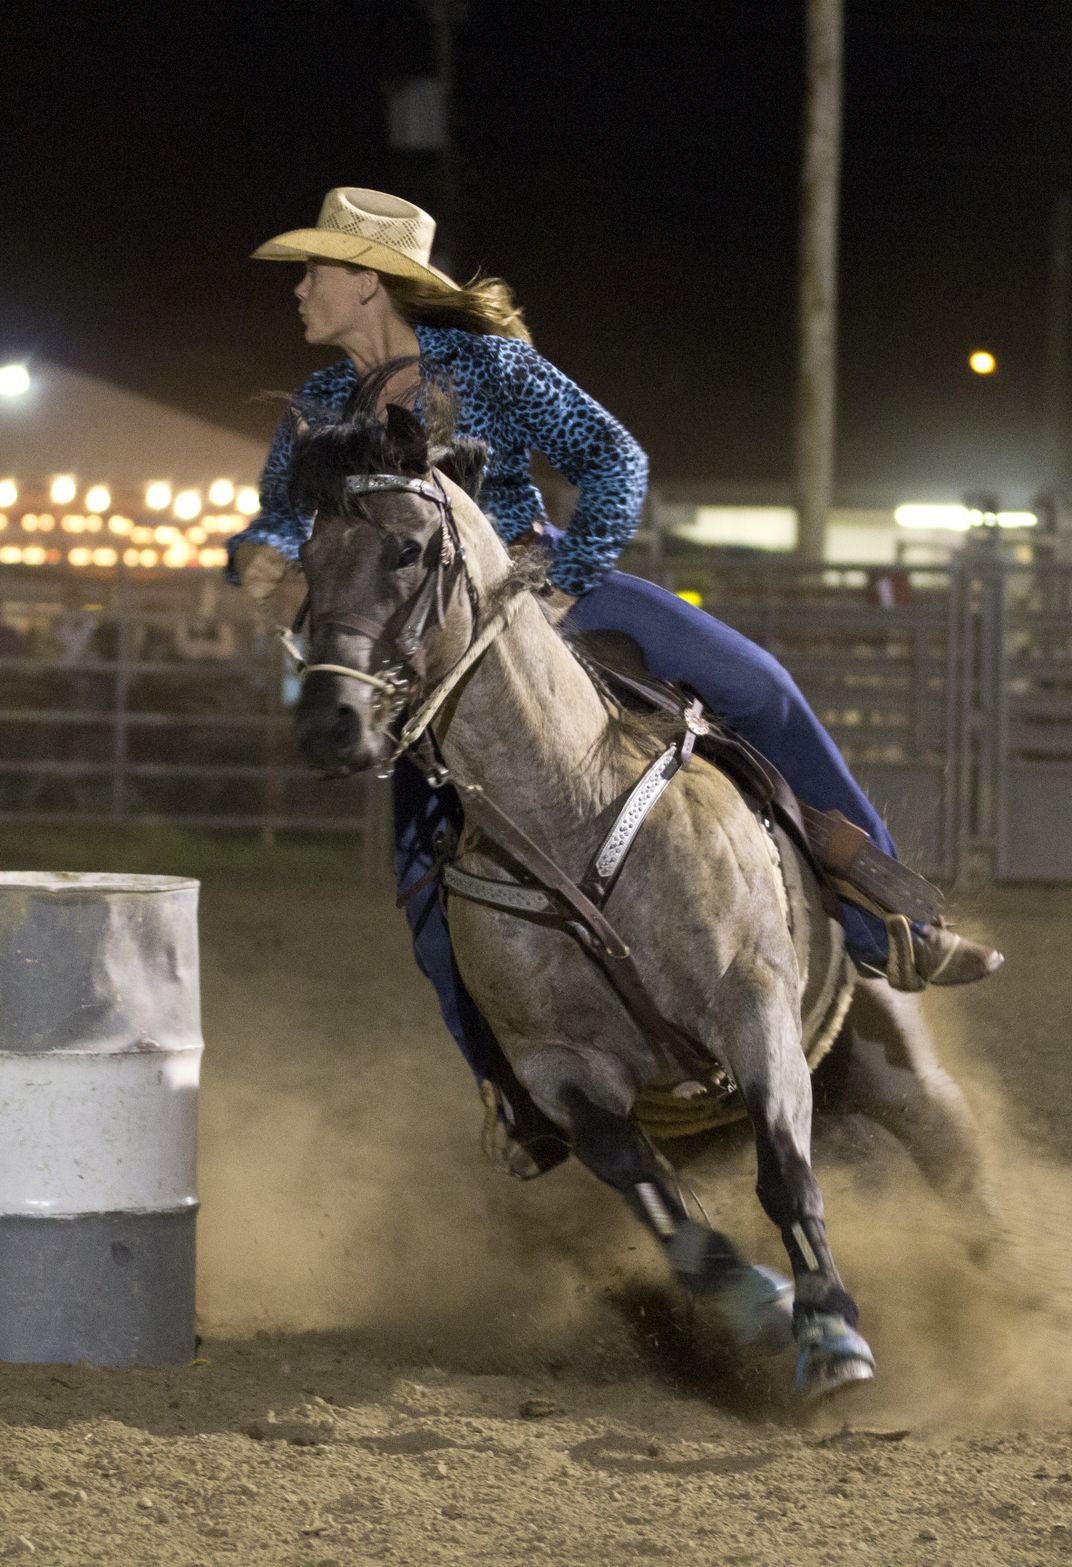 how to become a professional barrel racer